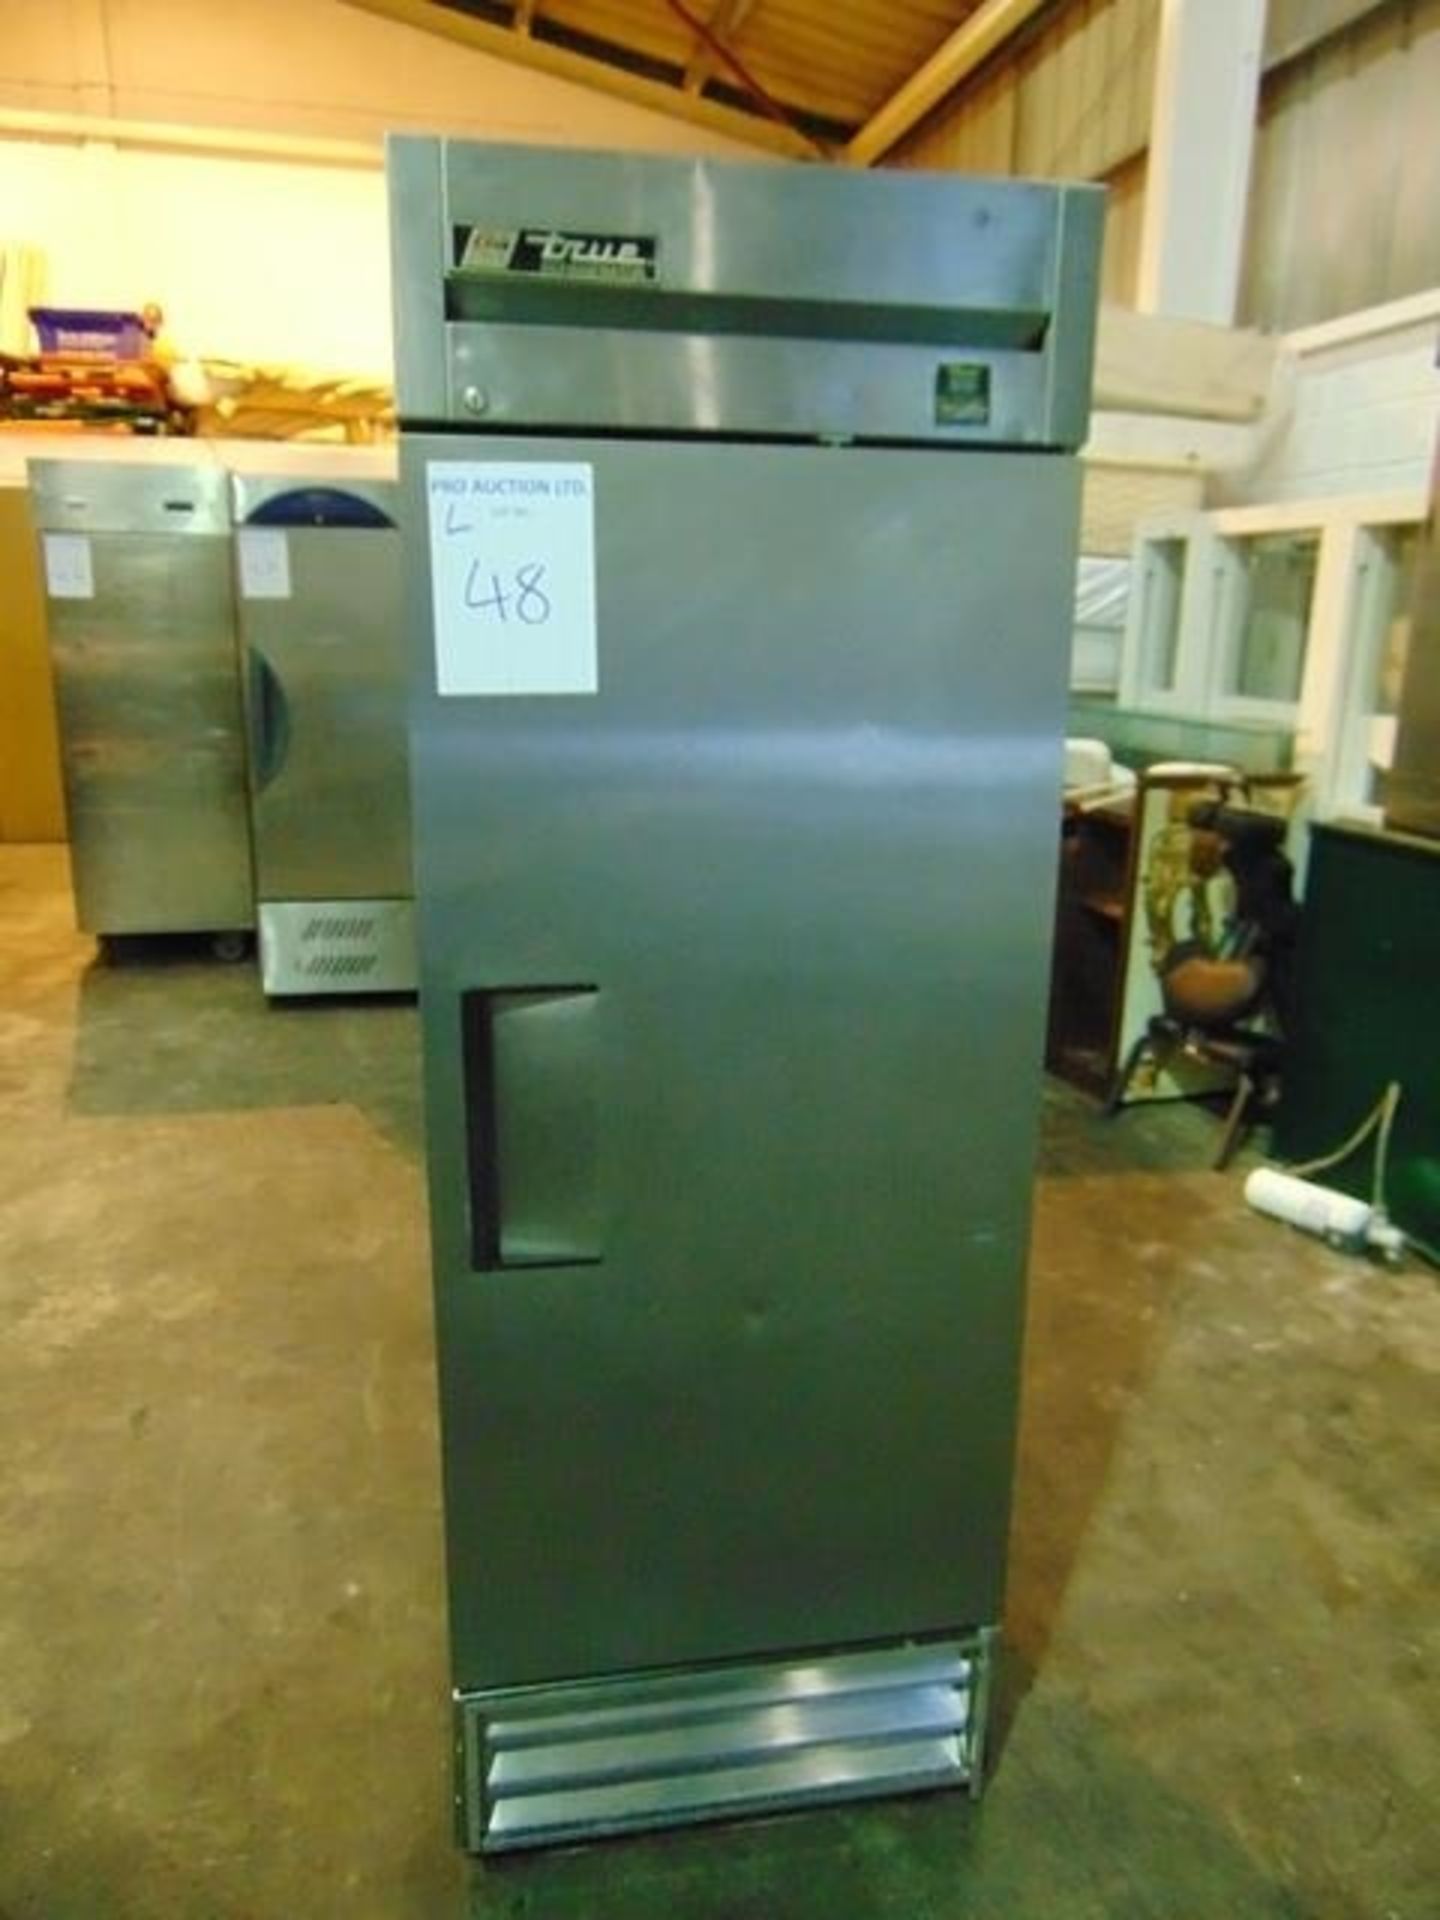 True T-19E 538 Ltr upright fridge stainless steel front and aluminium sides and interior 4 shelves